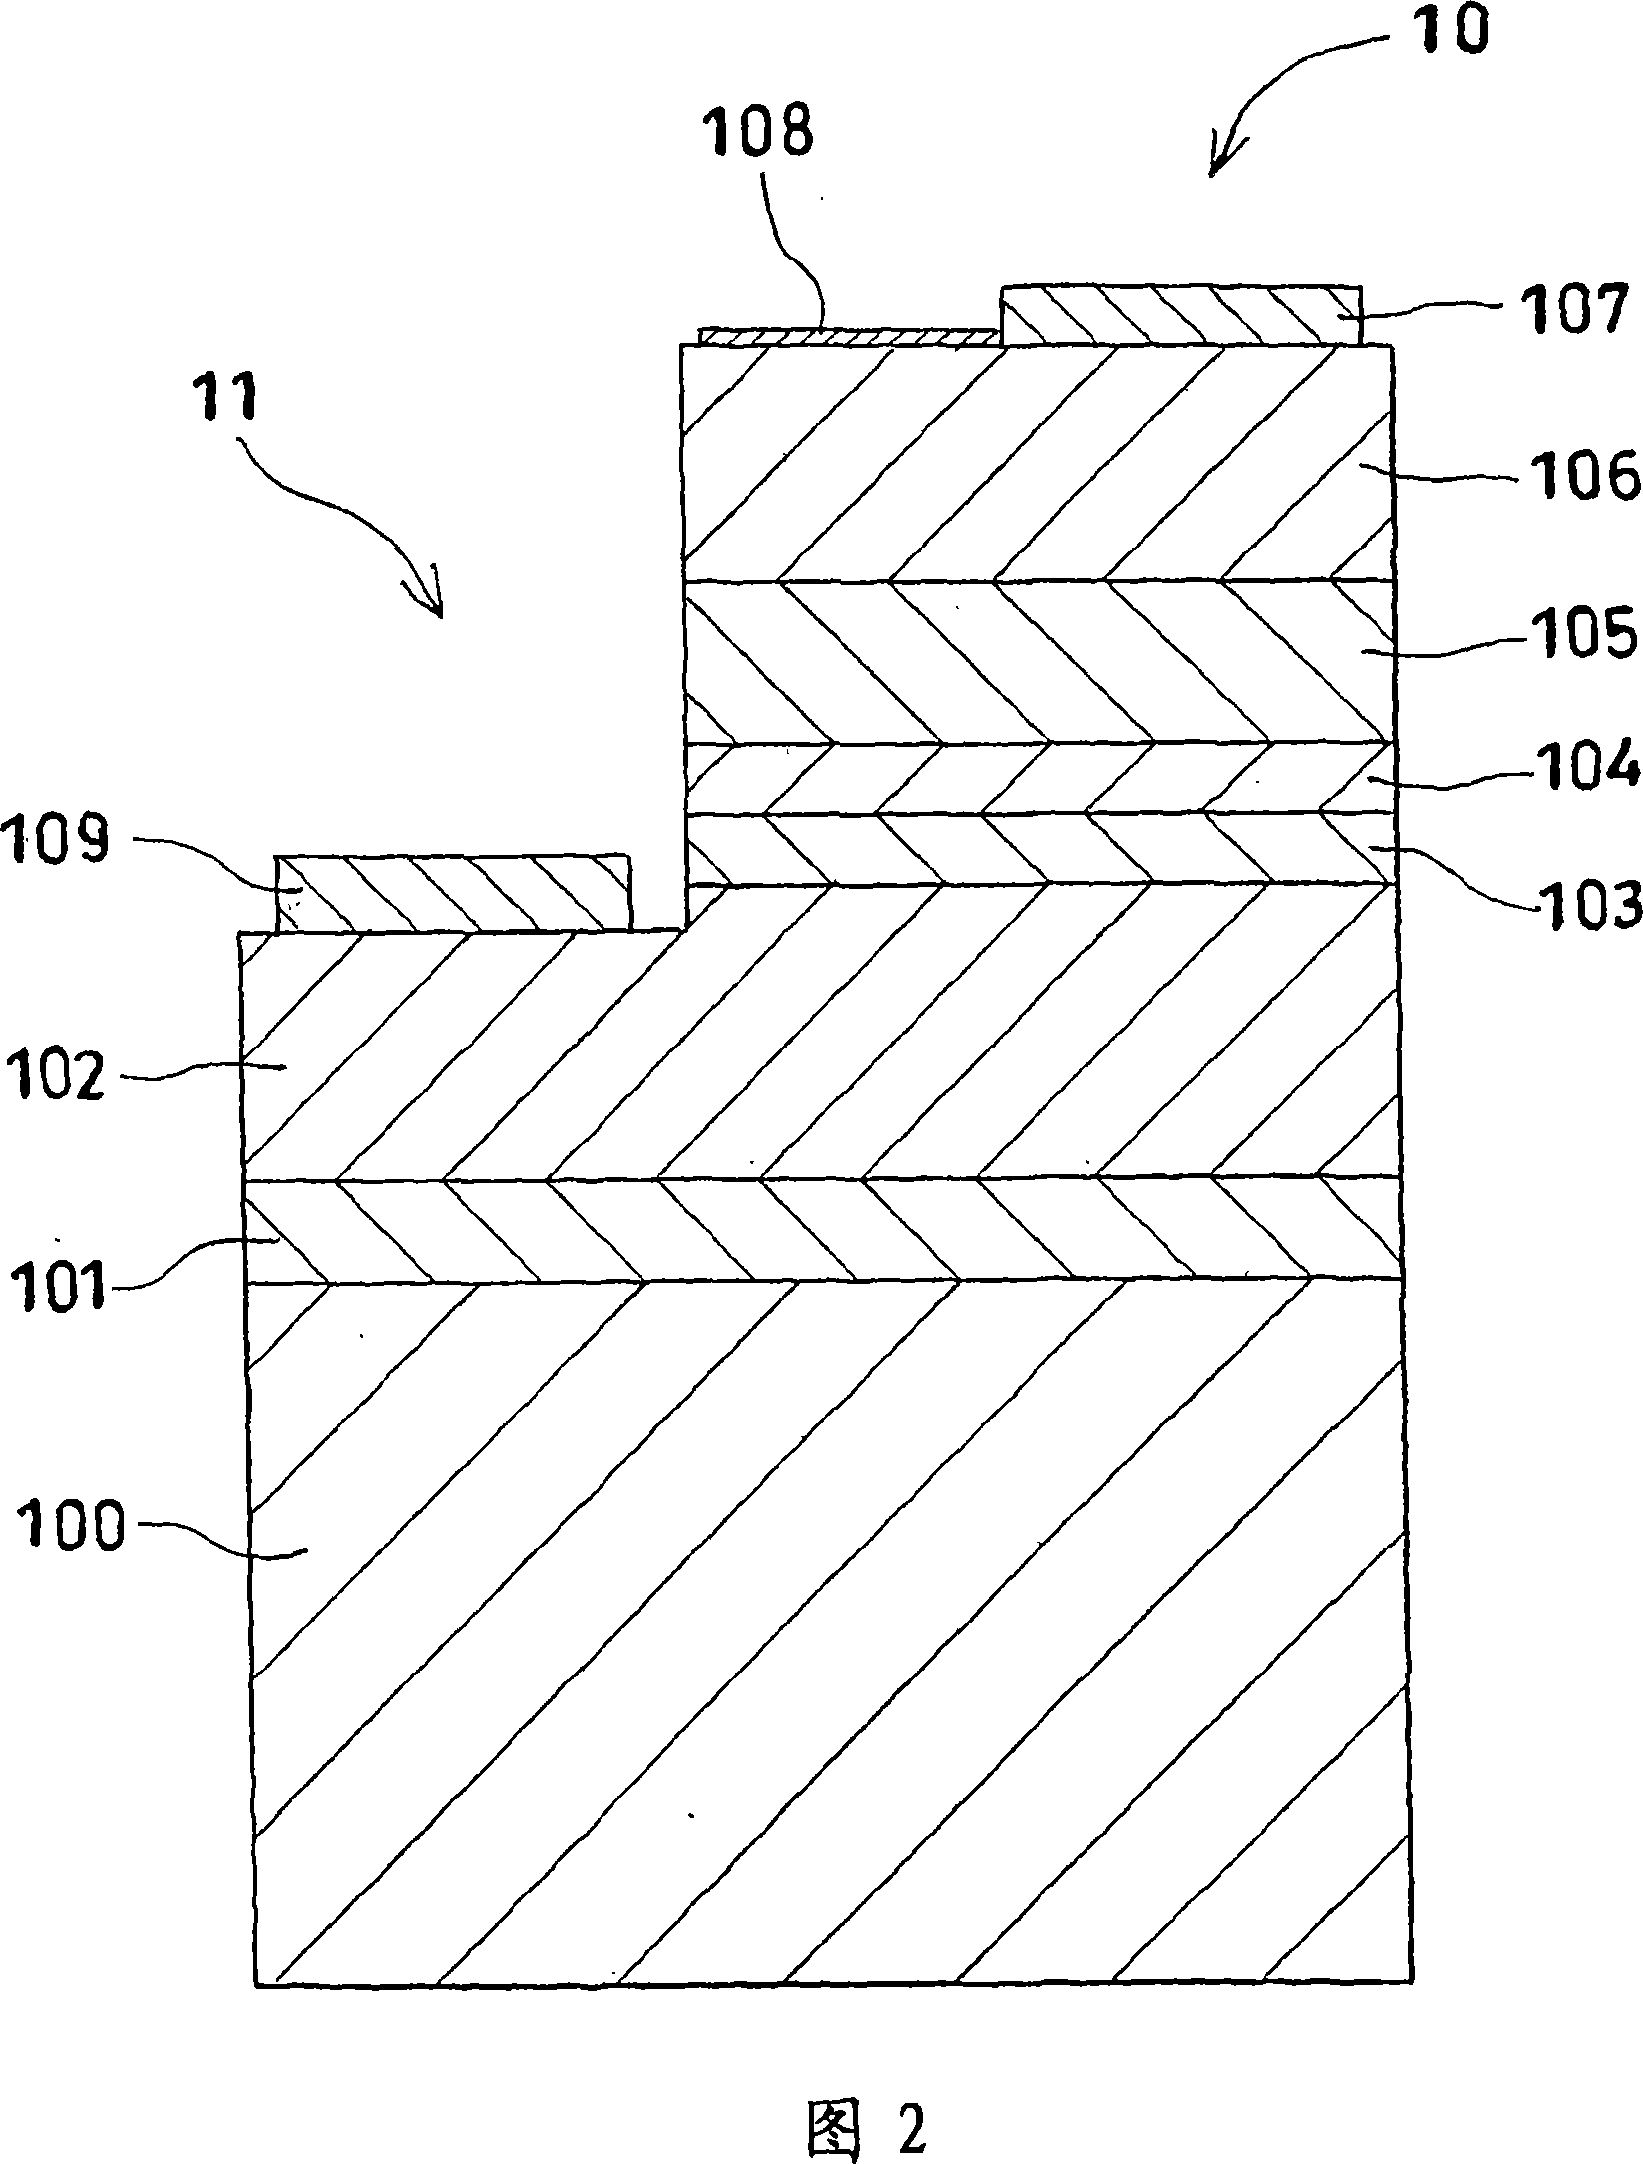 P-N junction-type compoud semiconductor light-emitting diode